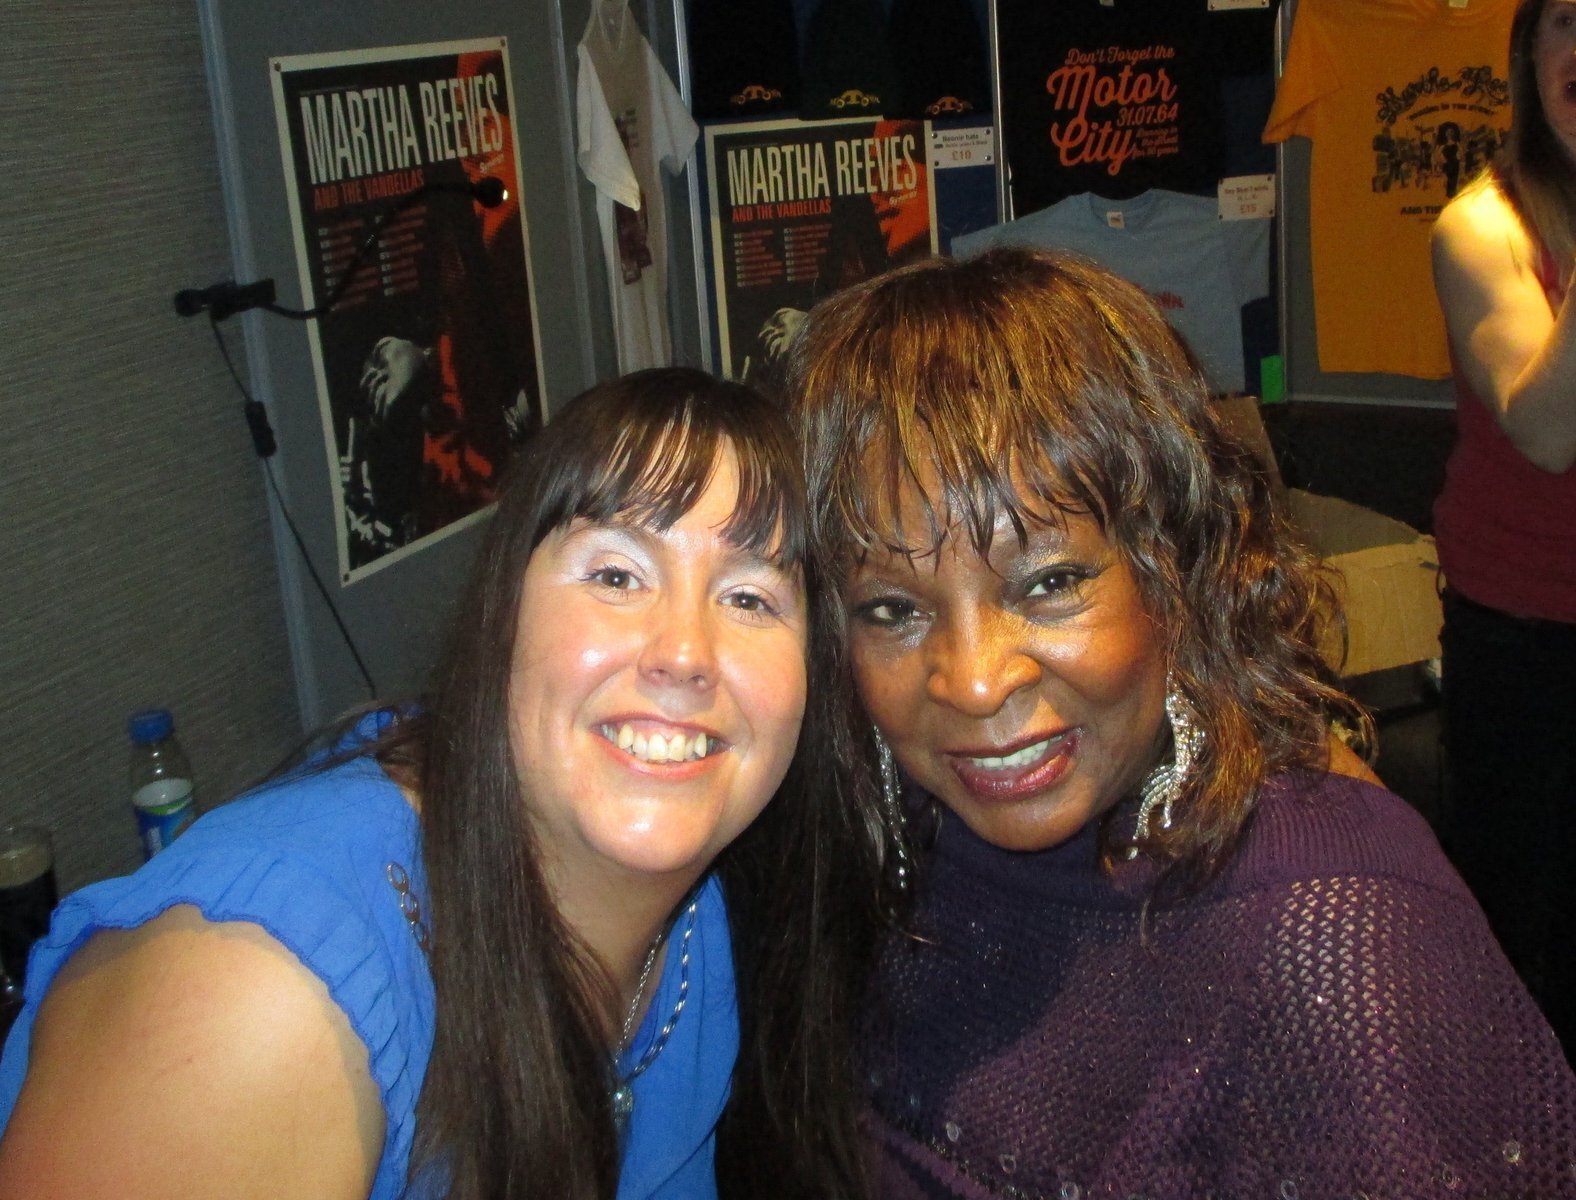 Kirsty's Birthday with Martha Reeves